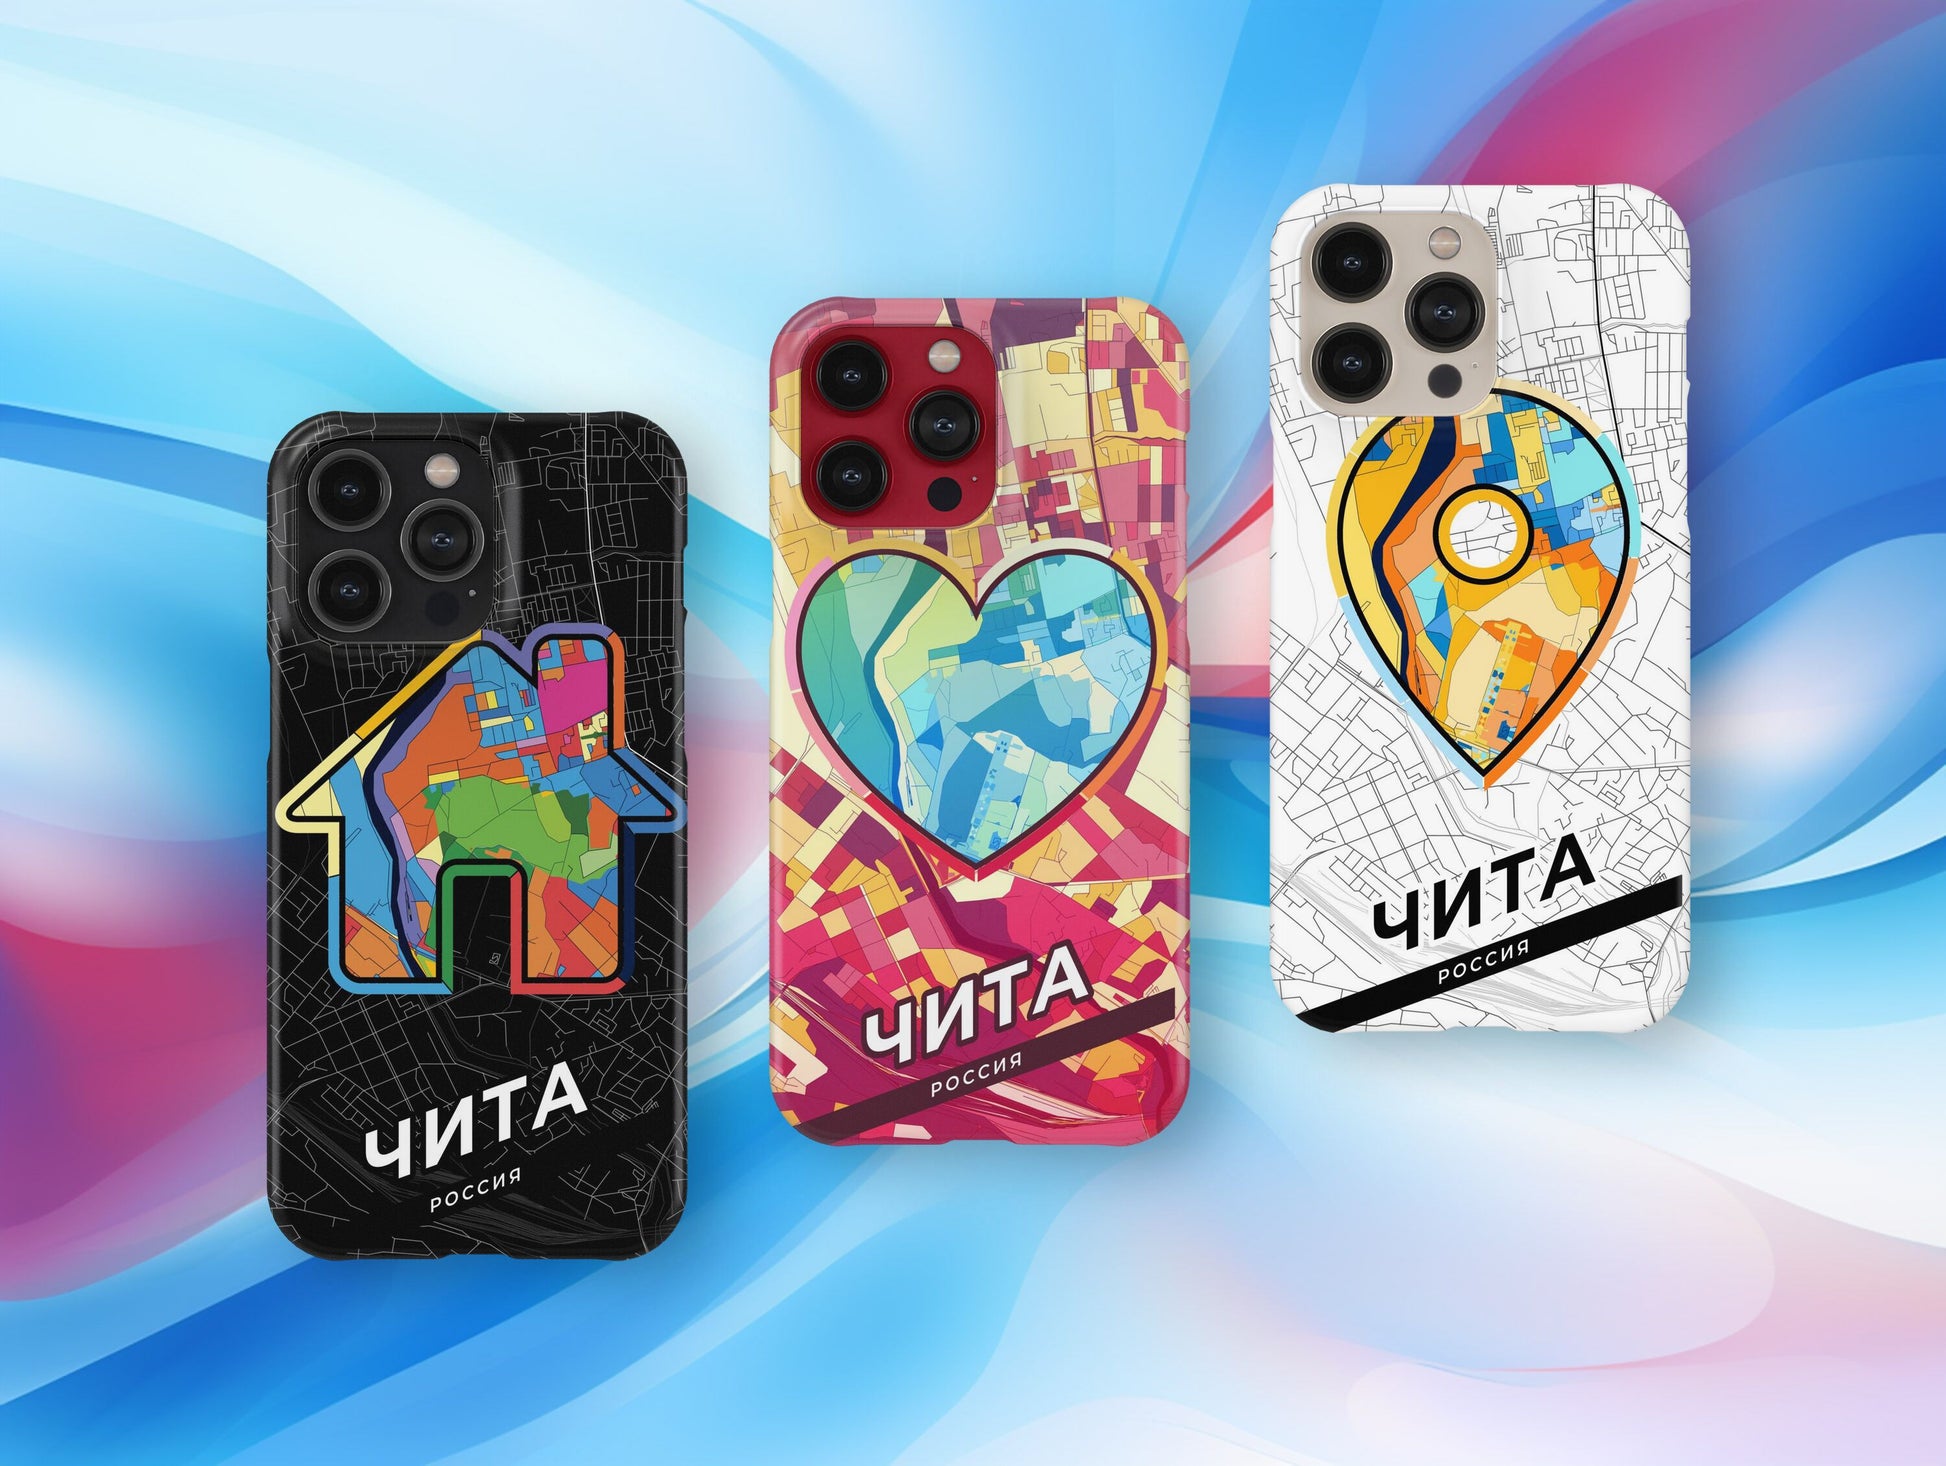 Chita Russia slim phone case with colorful icon. Birthday, wedding or housewarming gift. Couple match cases.